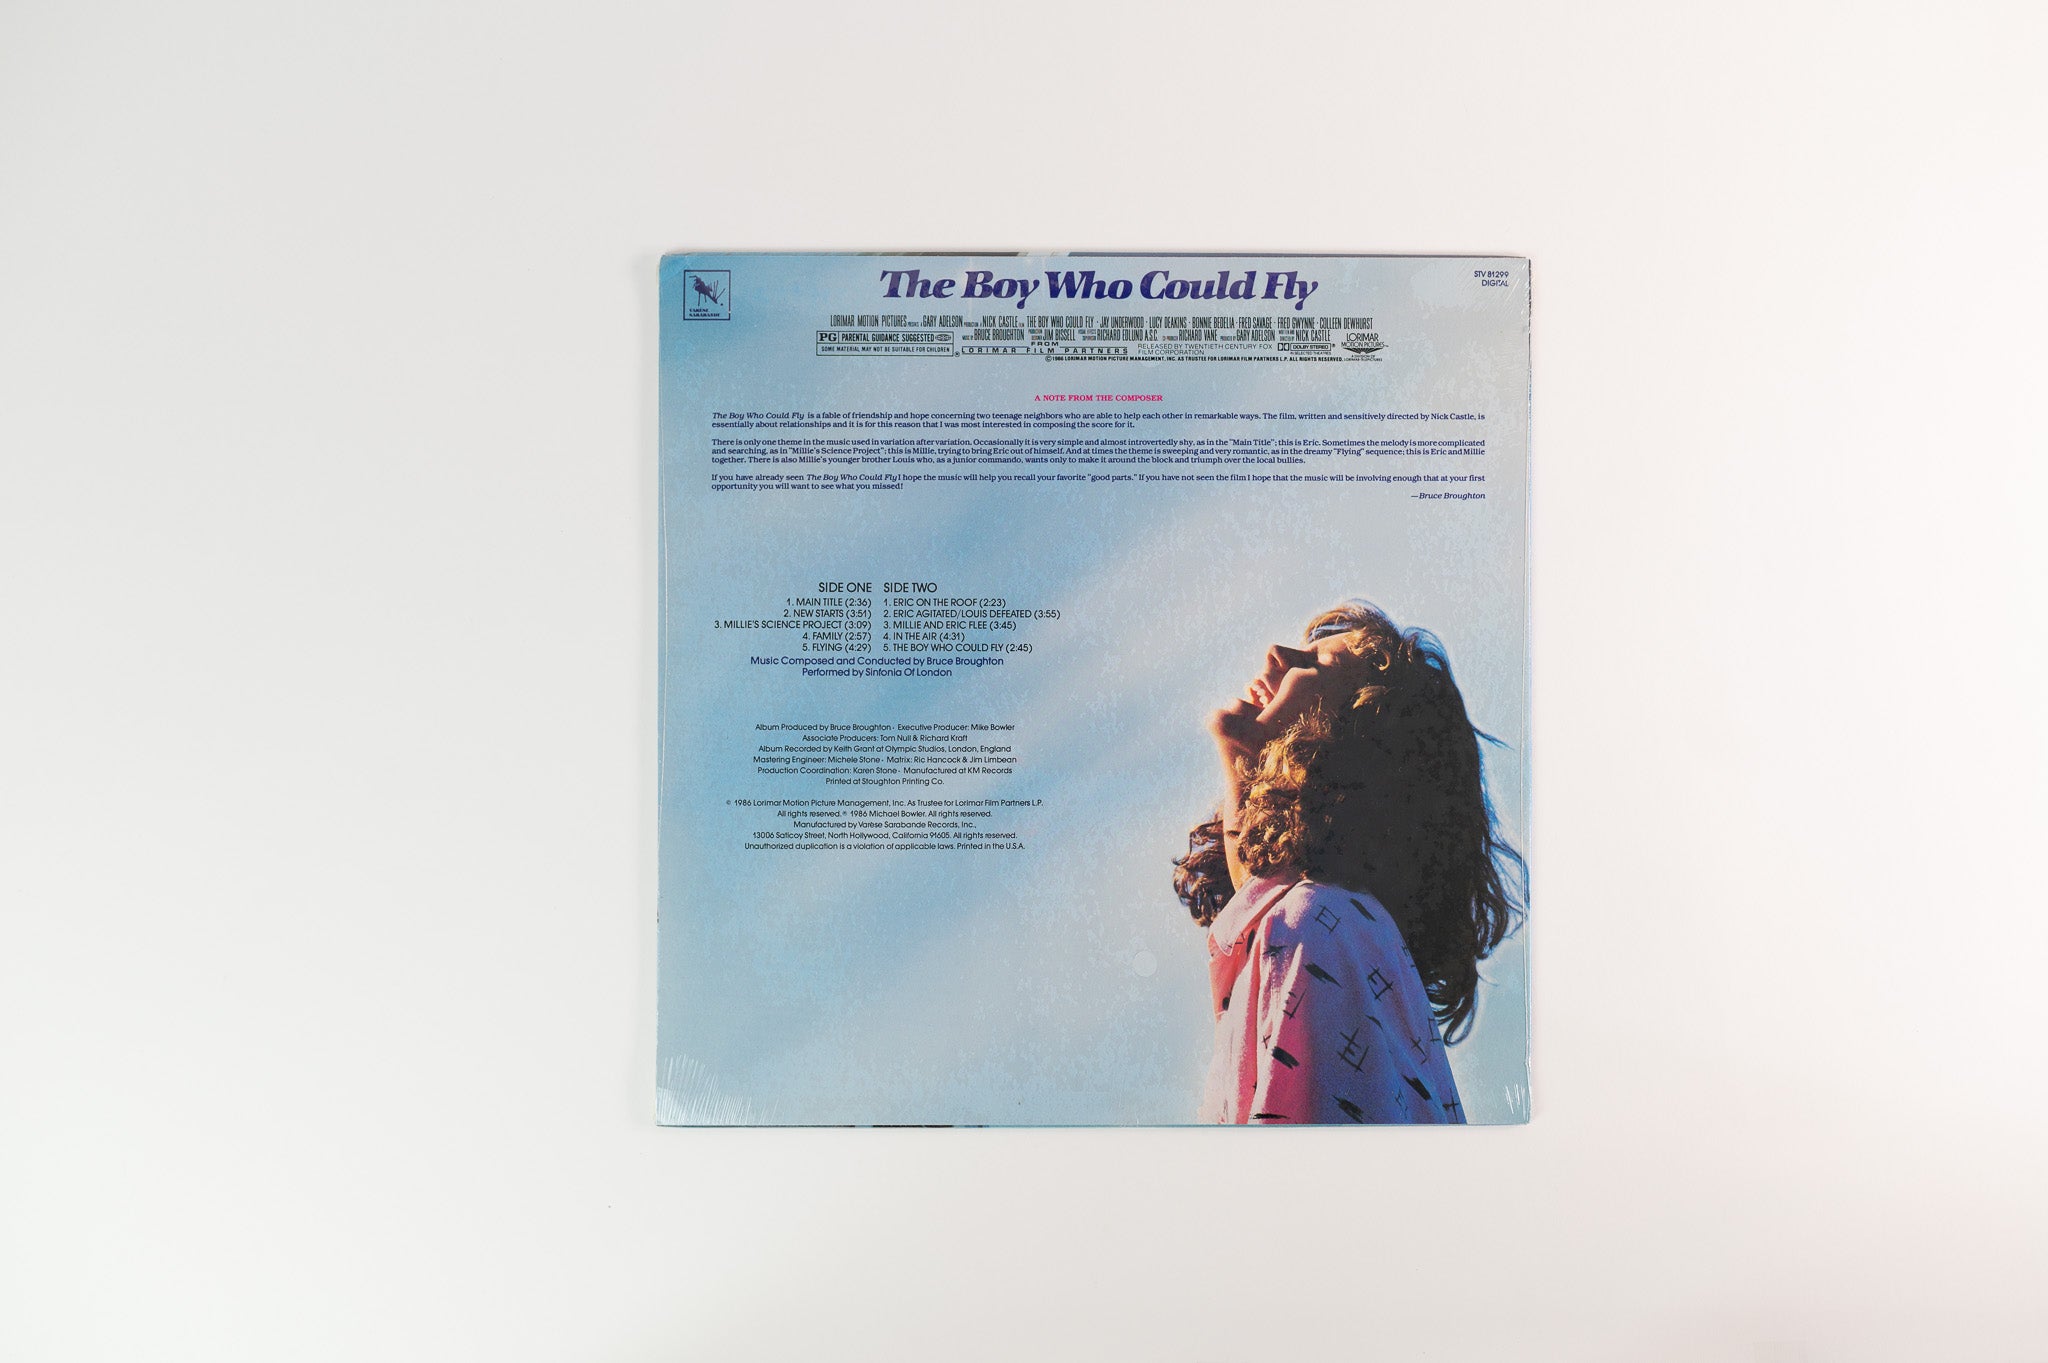 Bruce Broughton - The Boy Who Could Fly (Original Motion Picture Score) on Varese Sarabande - Sealed